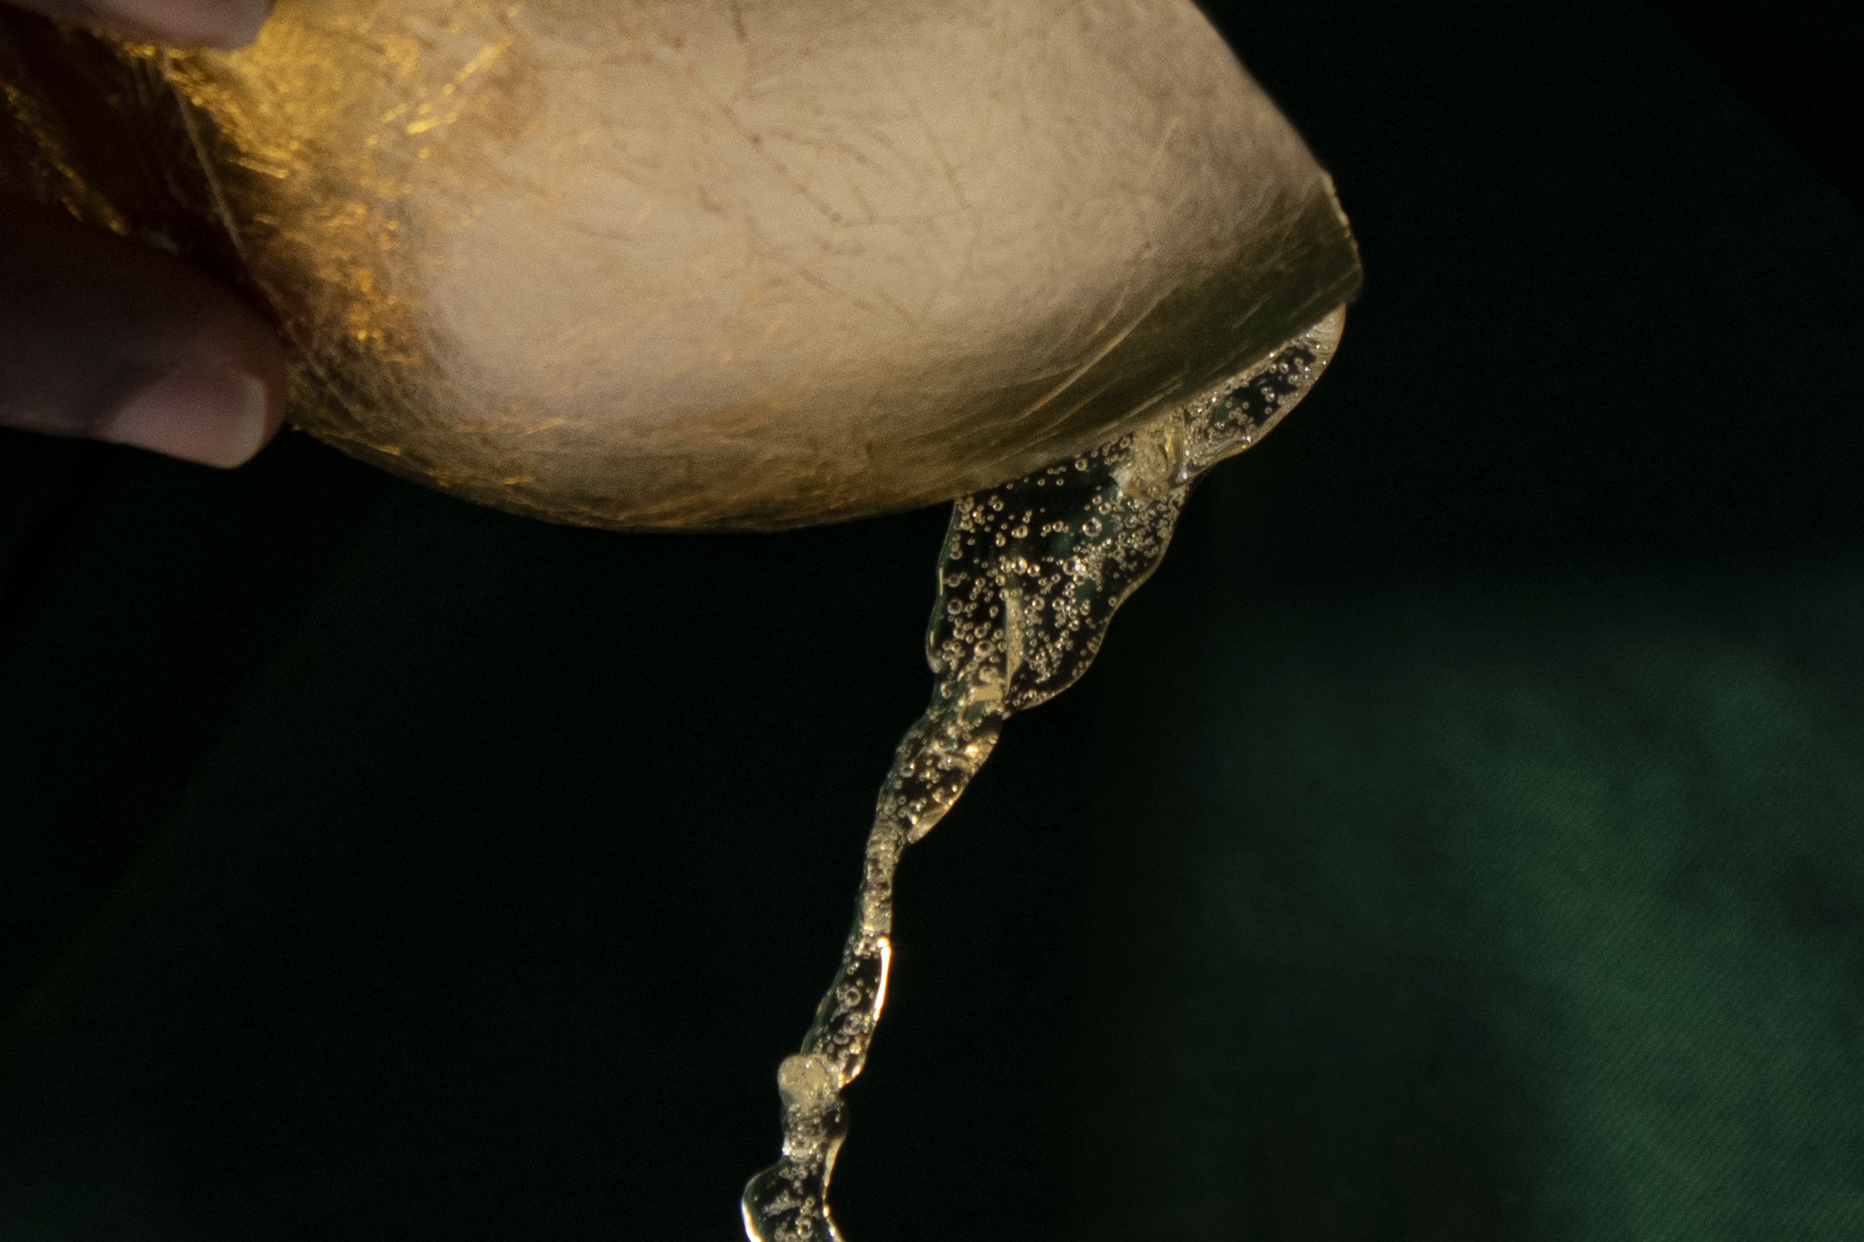 A golden chalice pours out bubbling yellow-ish palm wine.